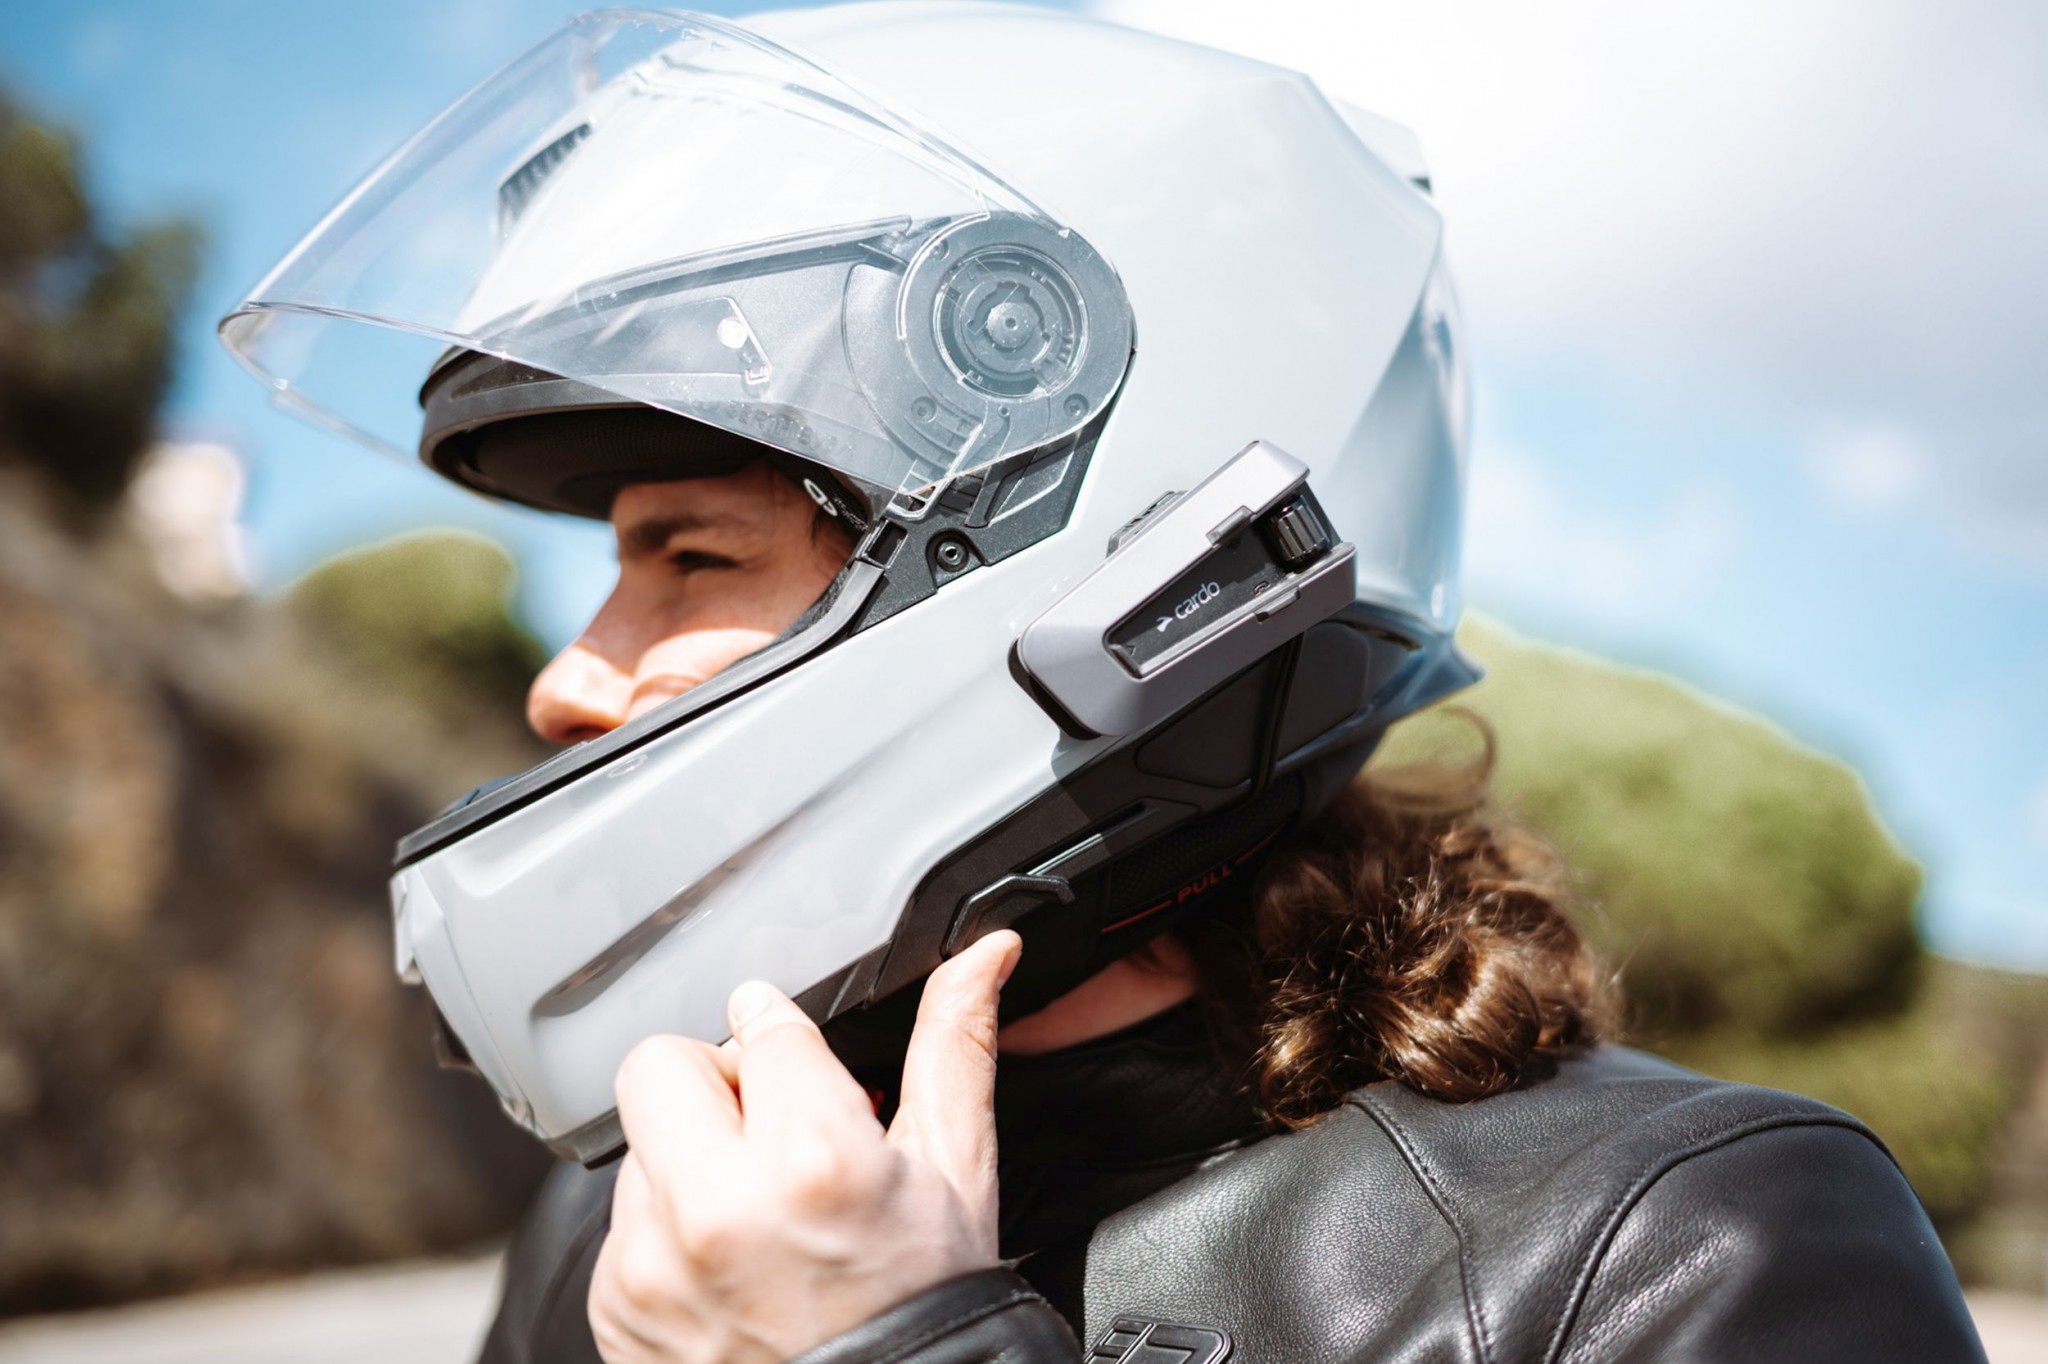 Schuberth S3 sport touring helmet in the test - Image 47